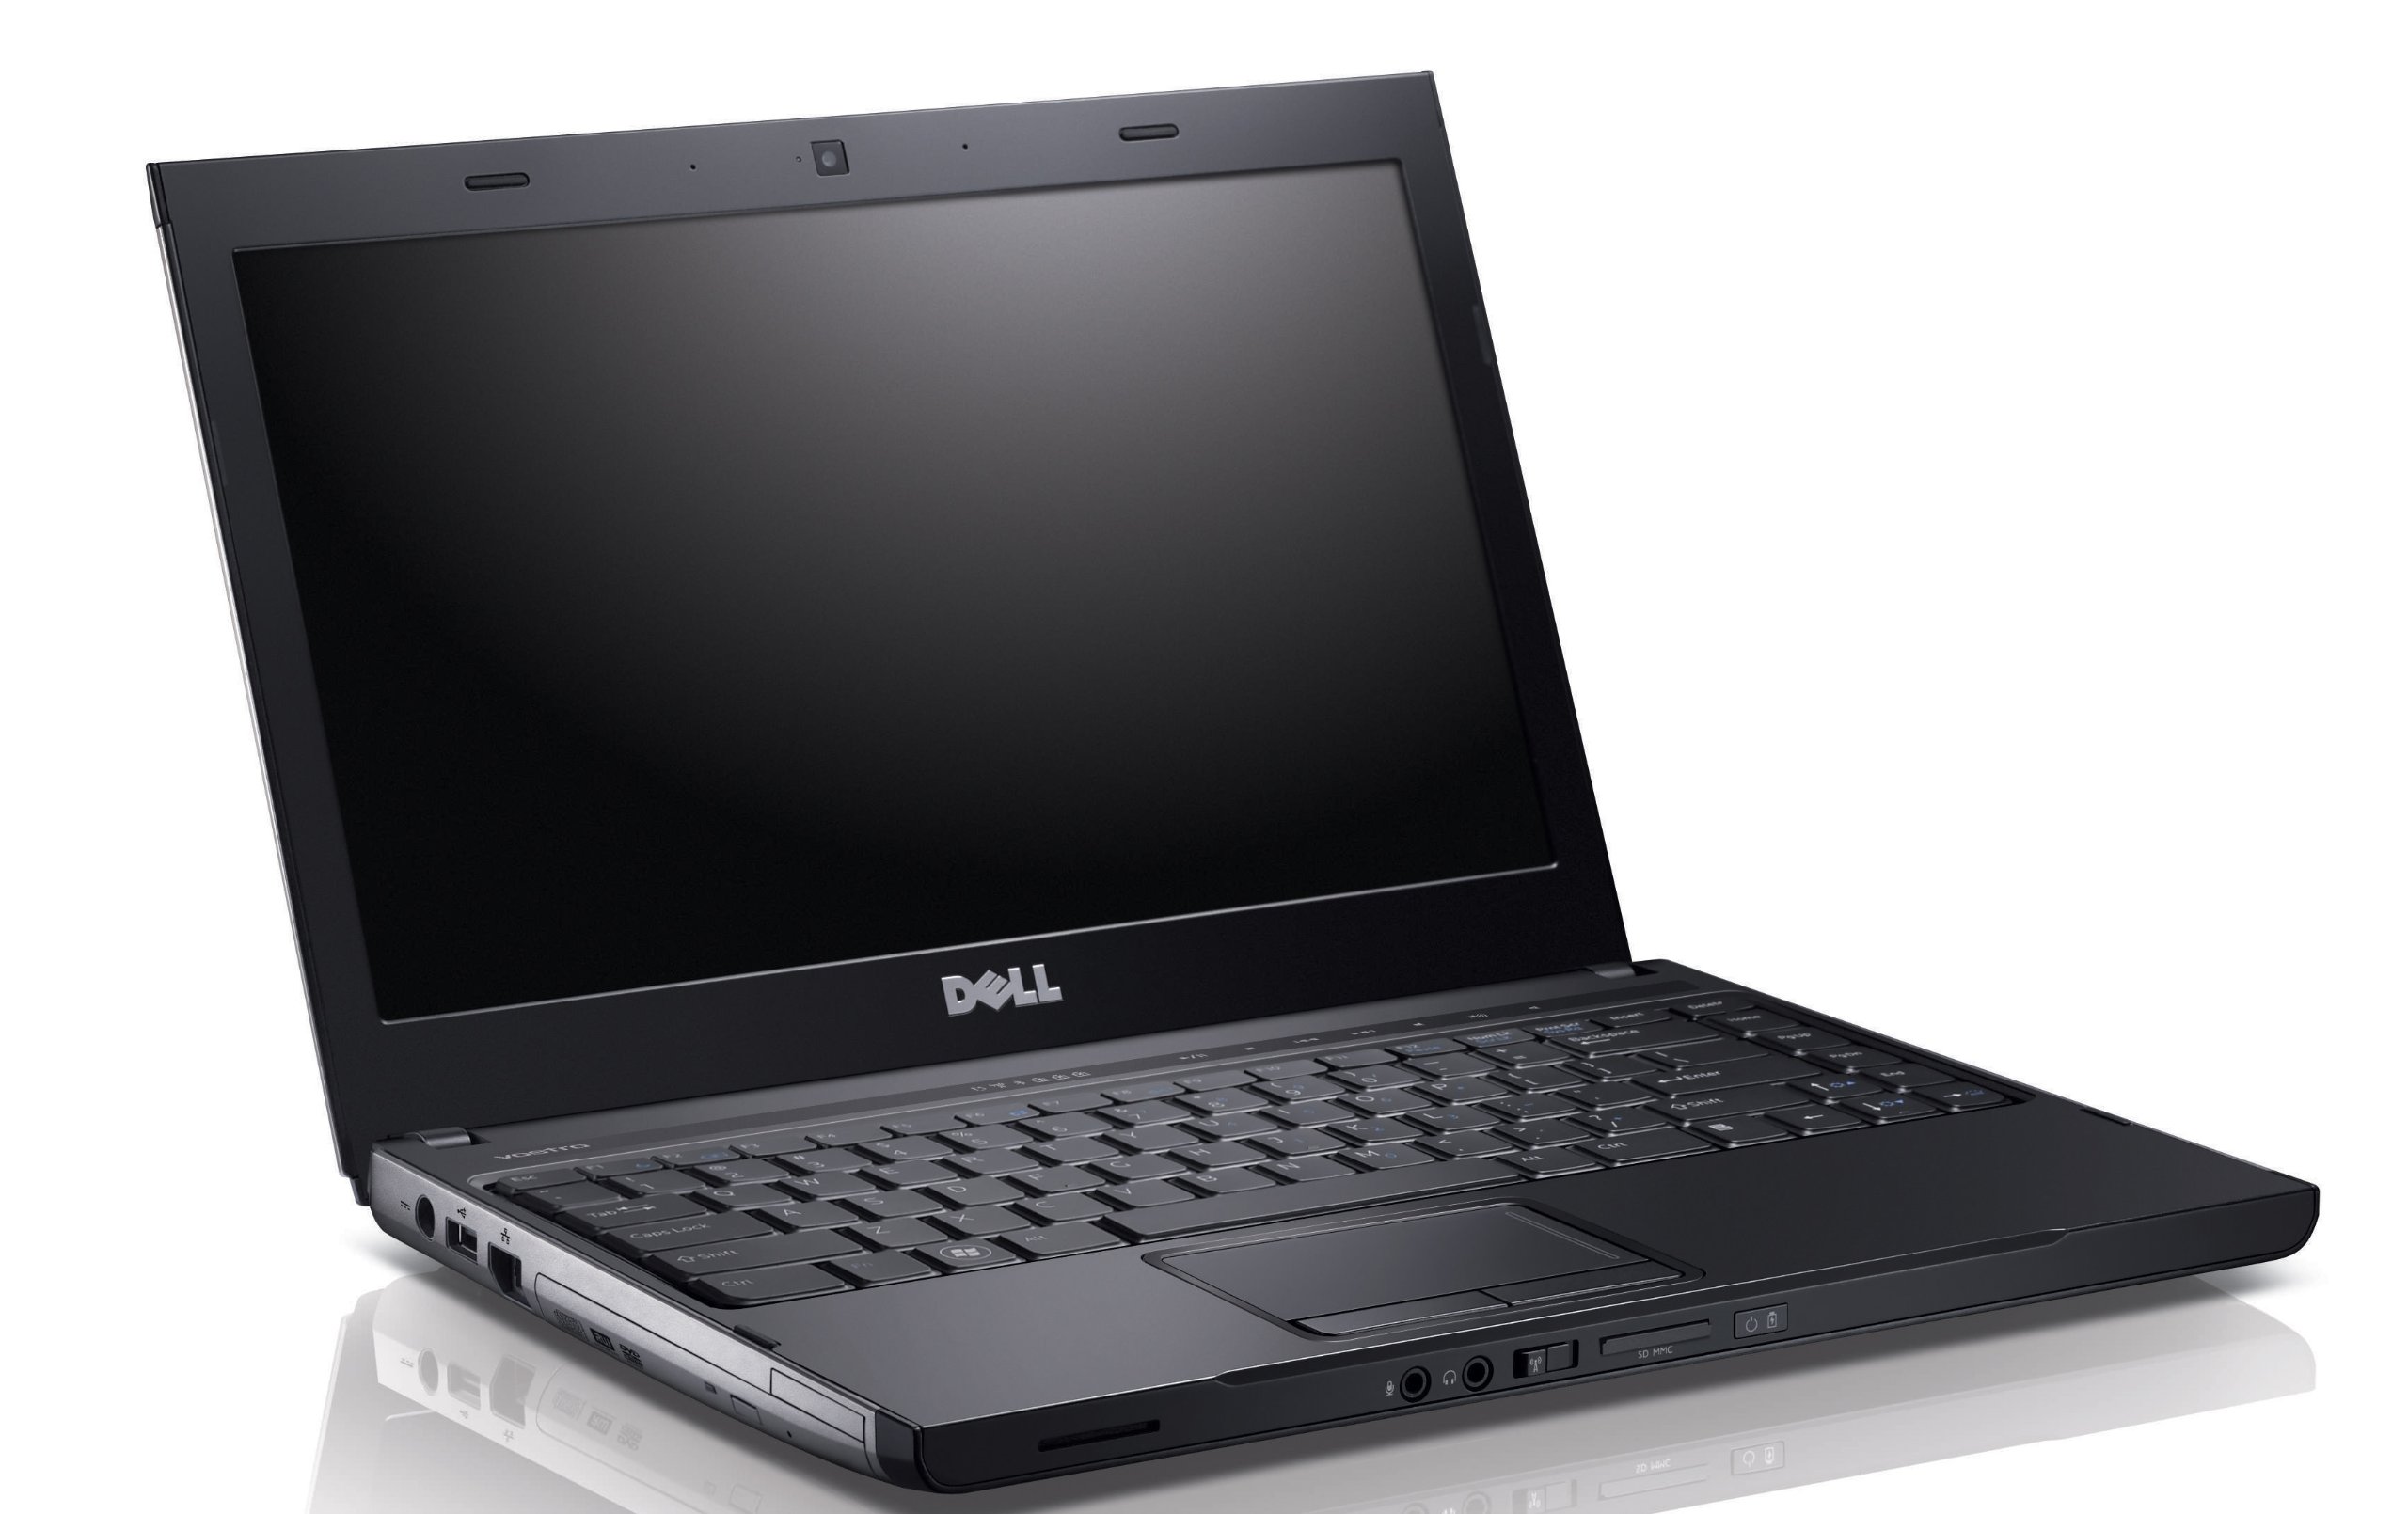 Dell Vostro 3400 DDR3 Notebook